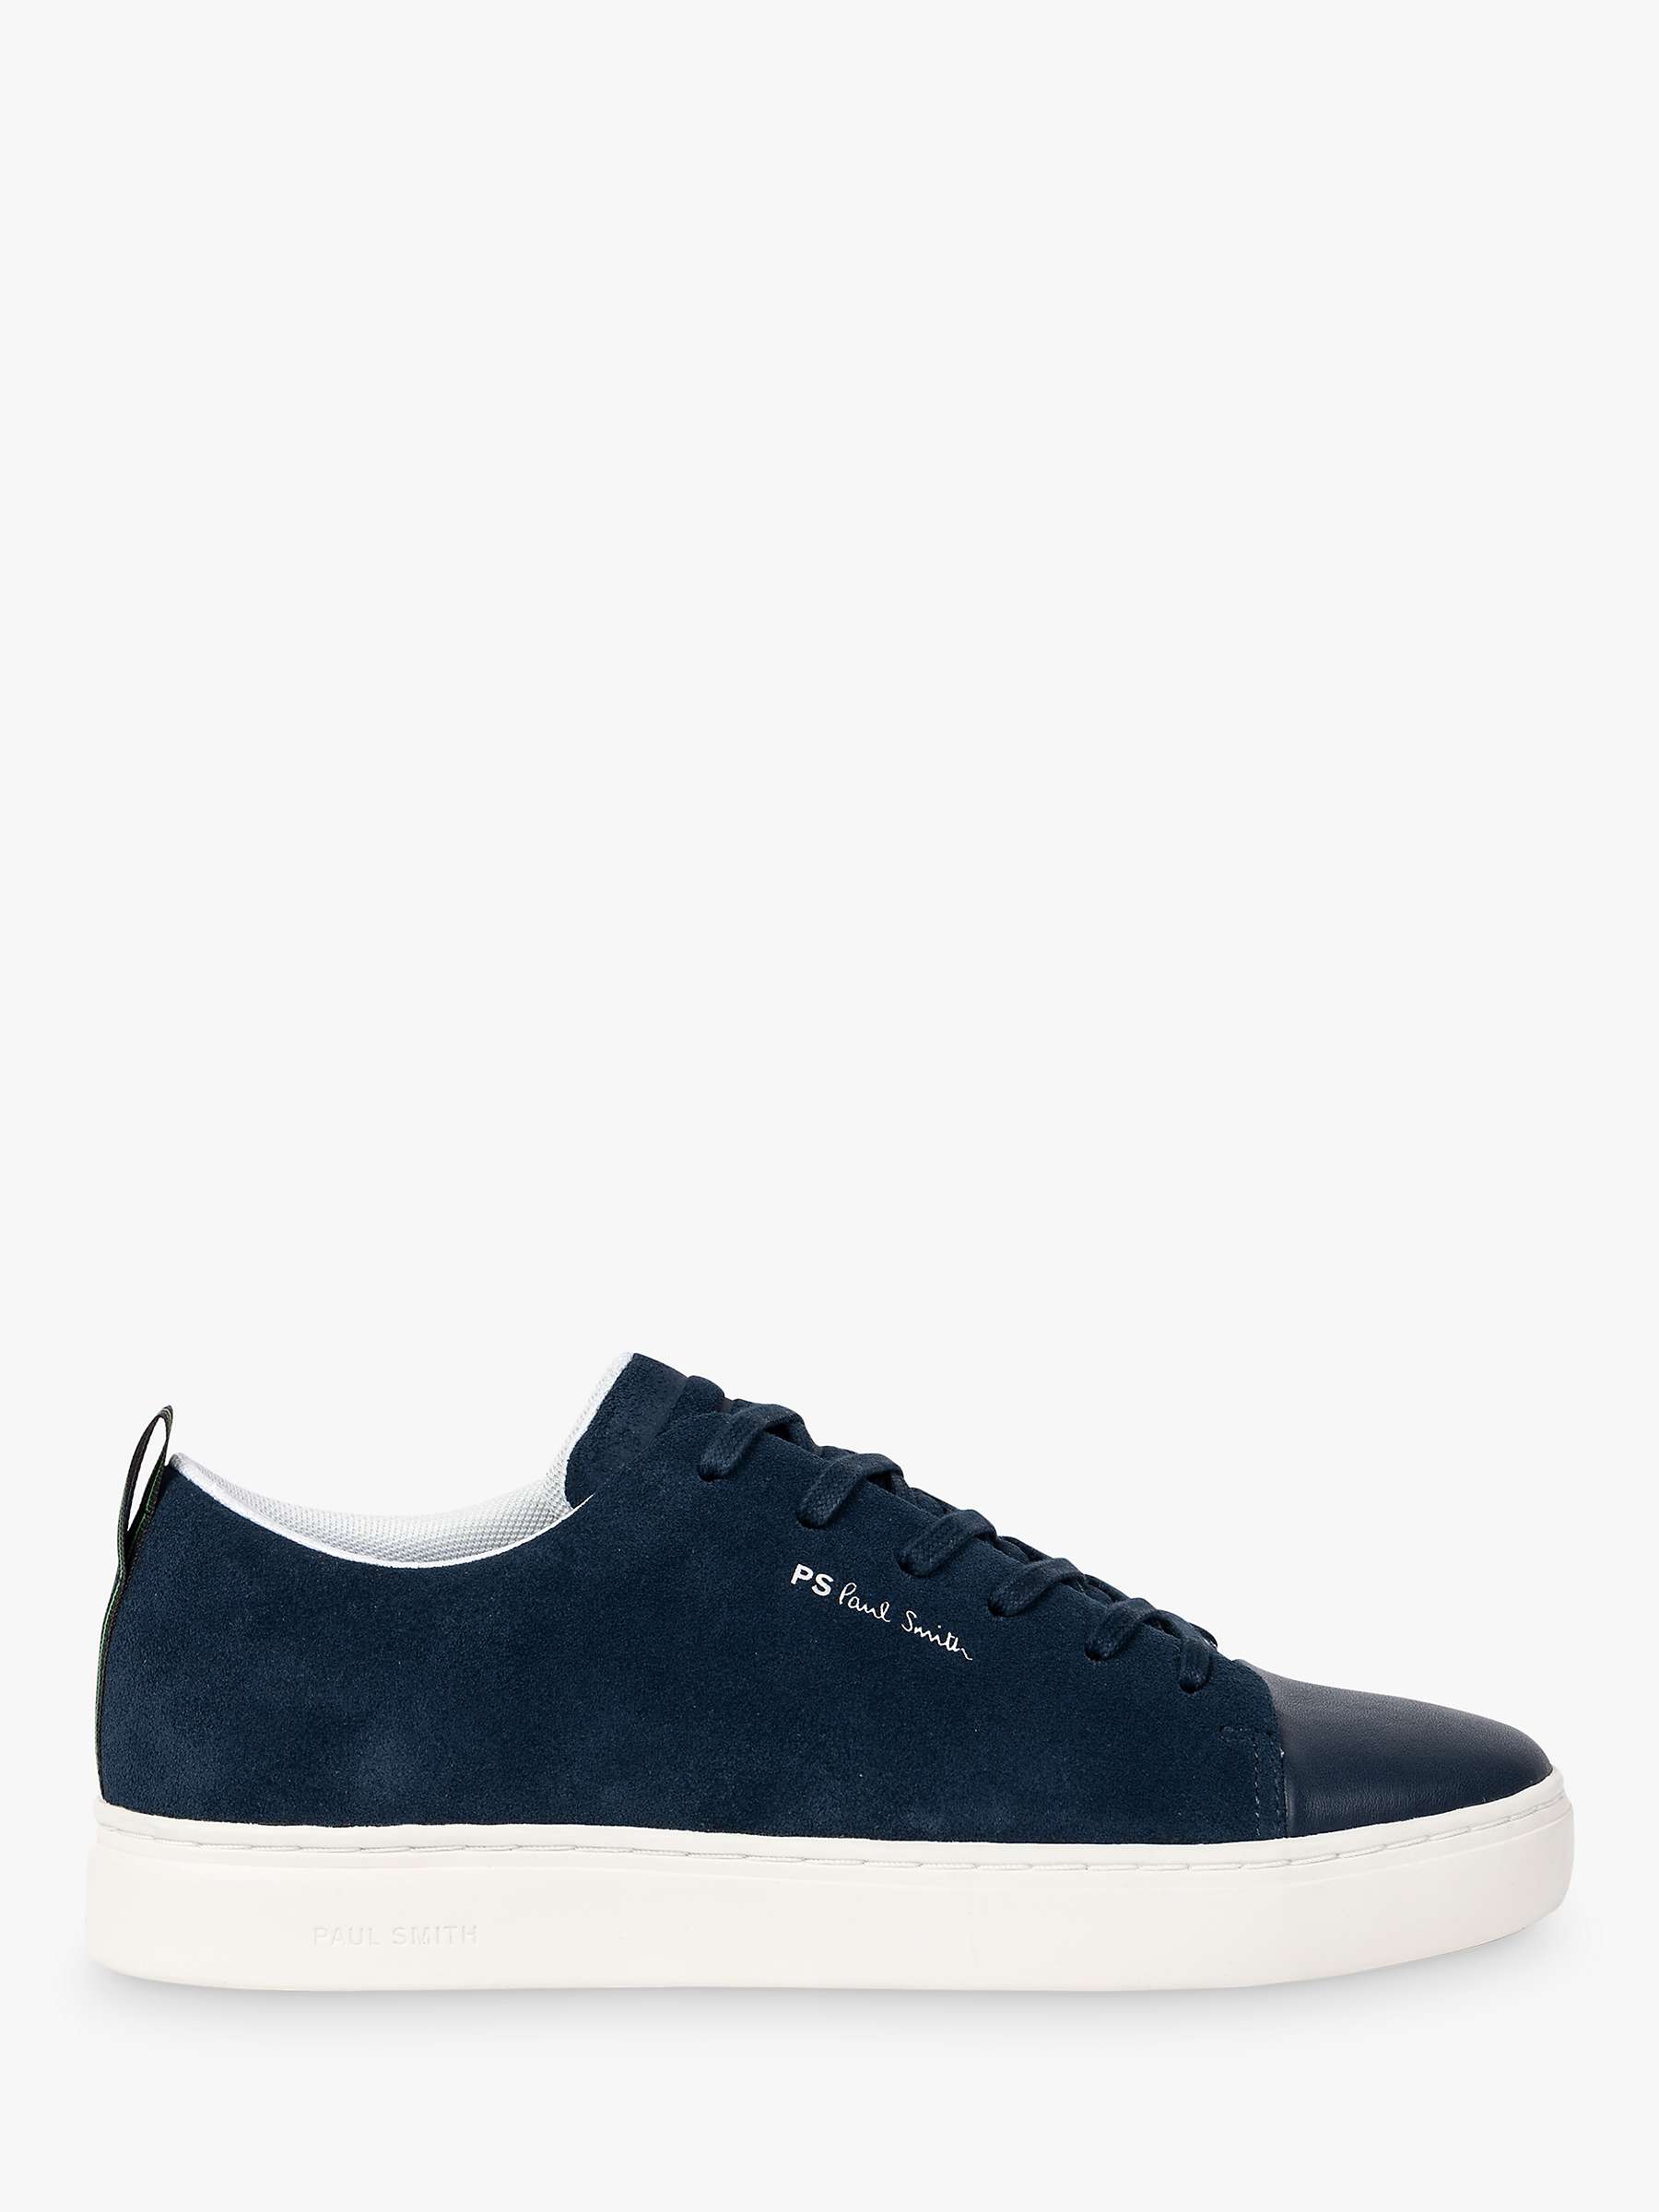 Buy Paul Smith Lee Suede Trainers Online at johnlewis.com